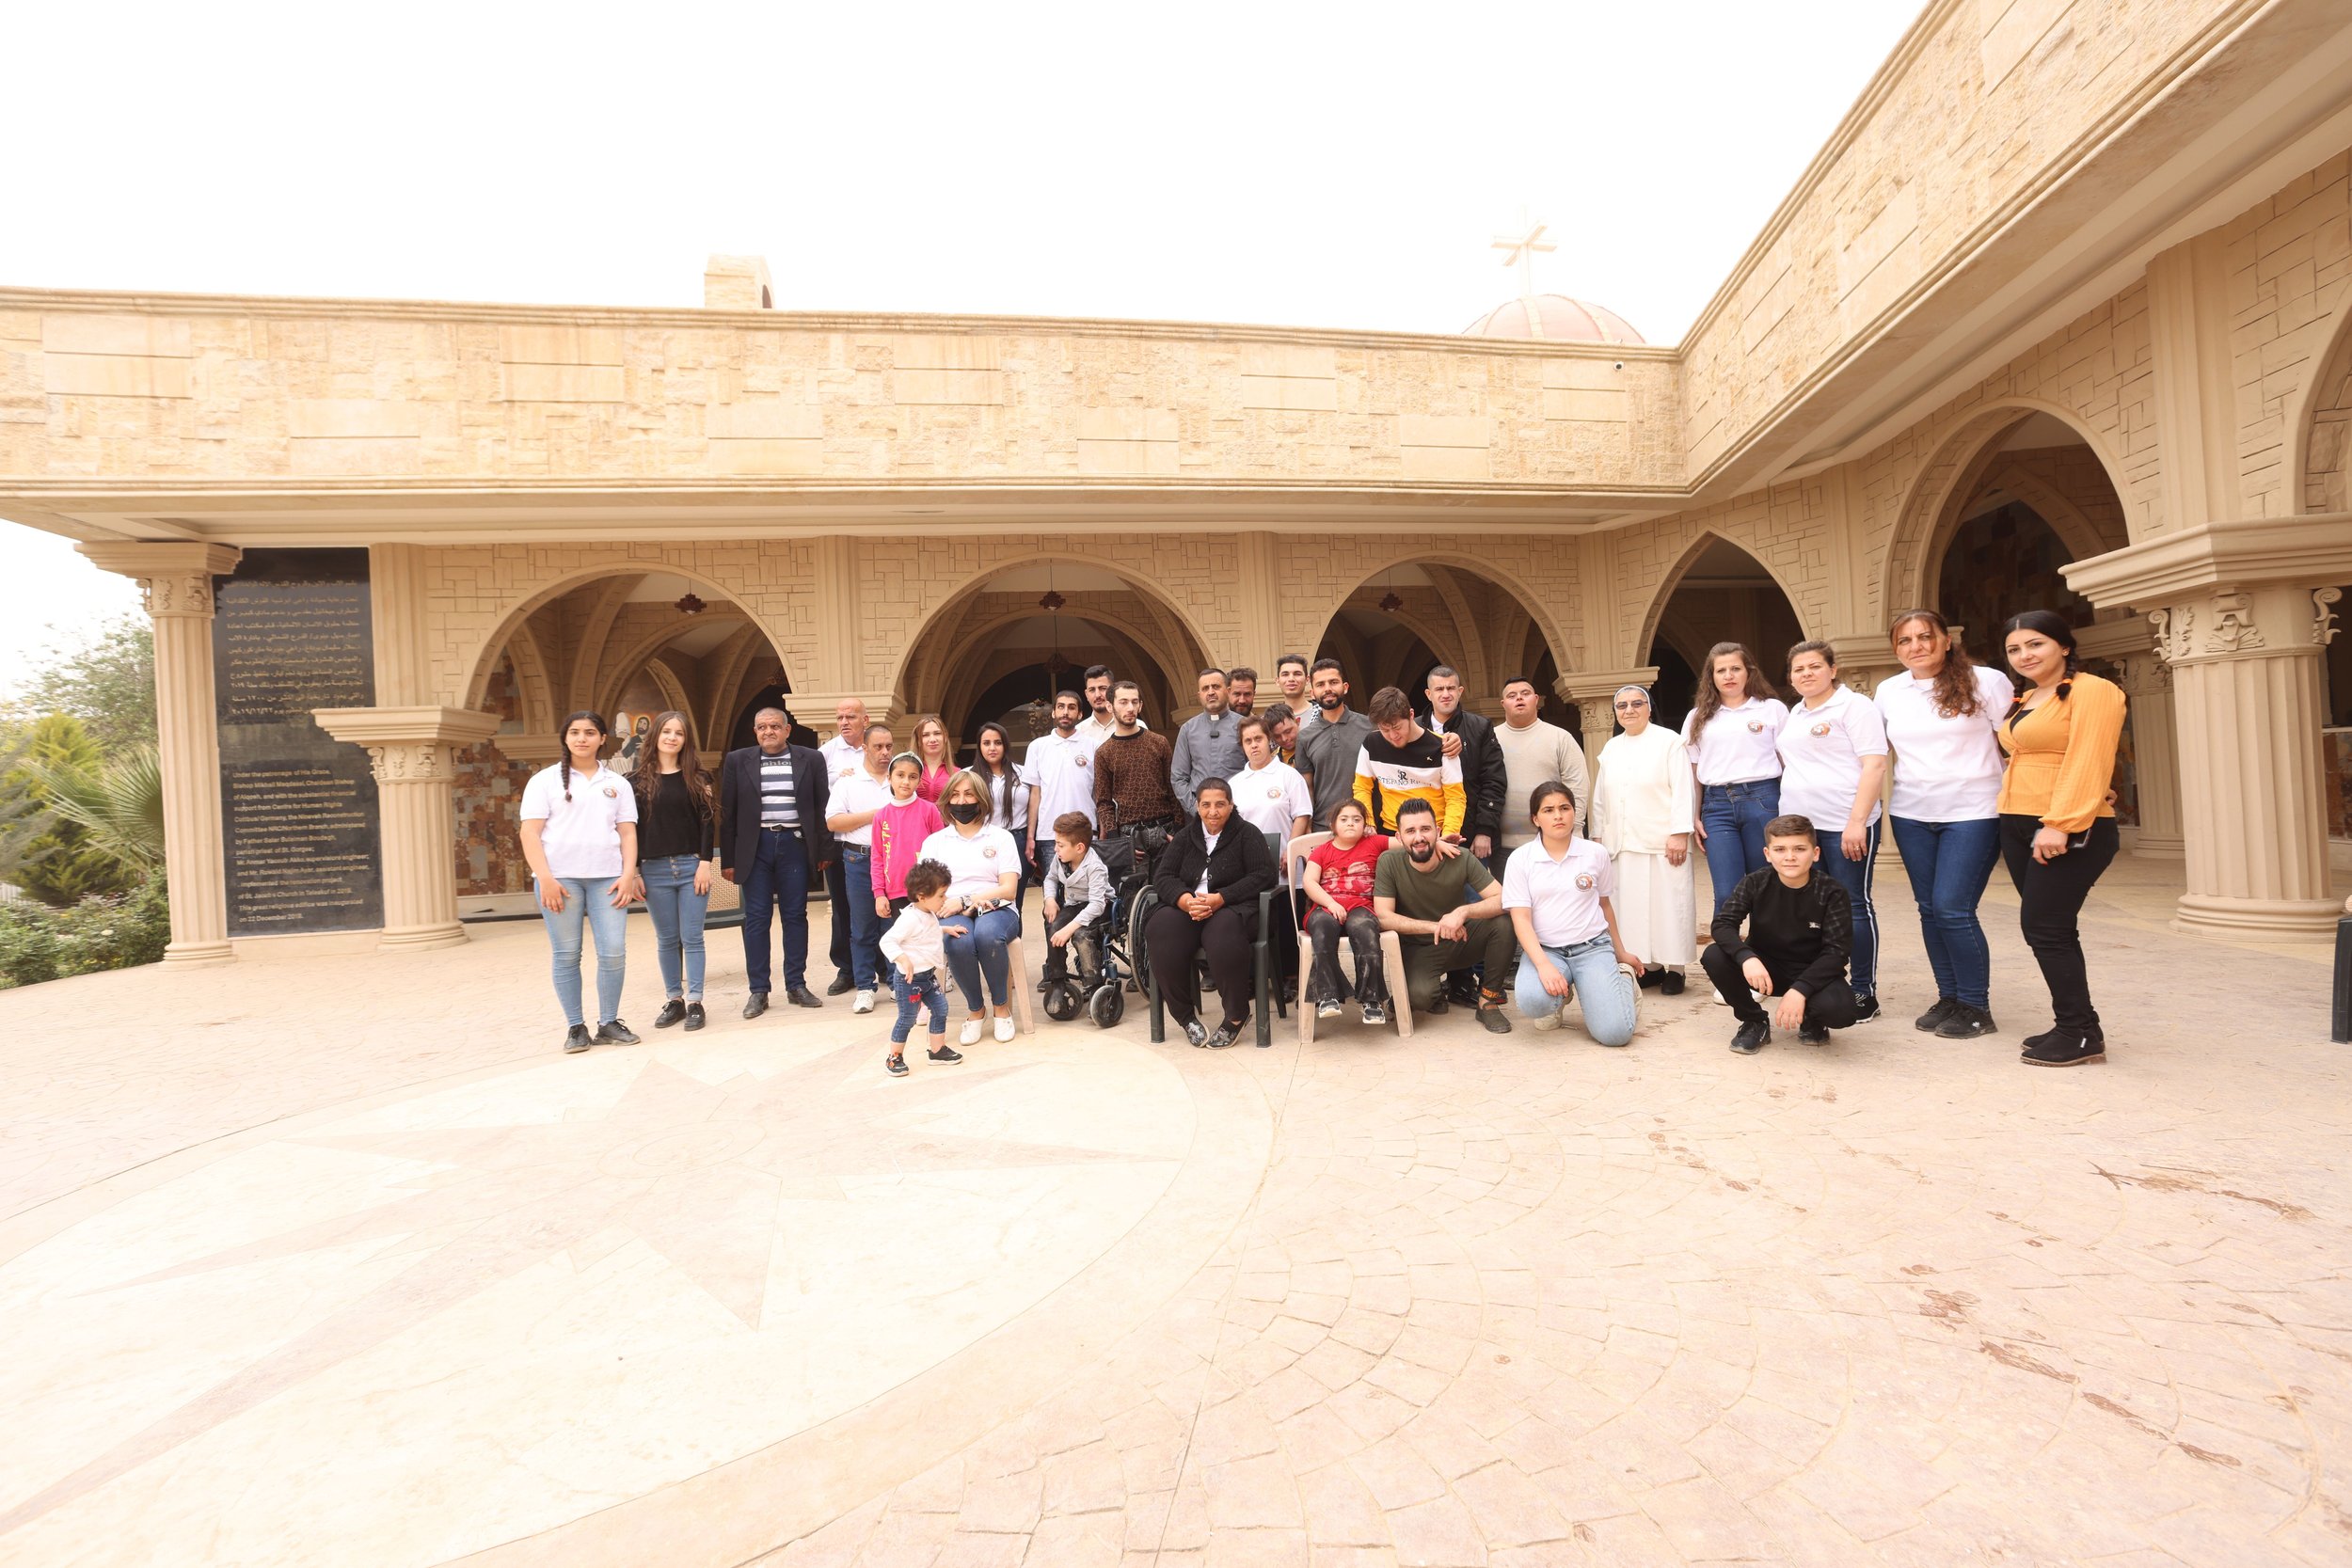  Parishioners of Mar Yaqo pose outside the church for a photo. They were gathering at the church to prepare for Easter celebrations. Iraqi officials have made efforts to secure churches since the violence of a 2010 attack on Our Lady of Salvation in 